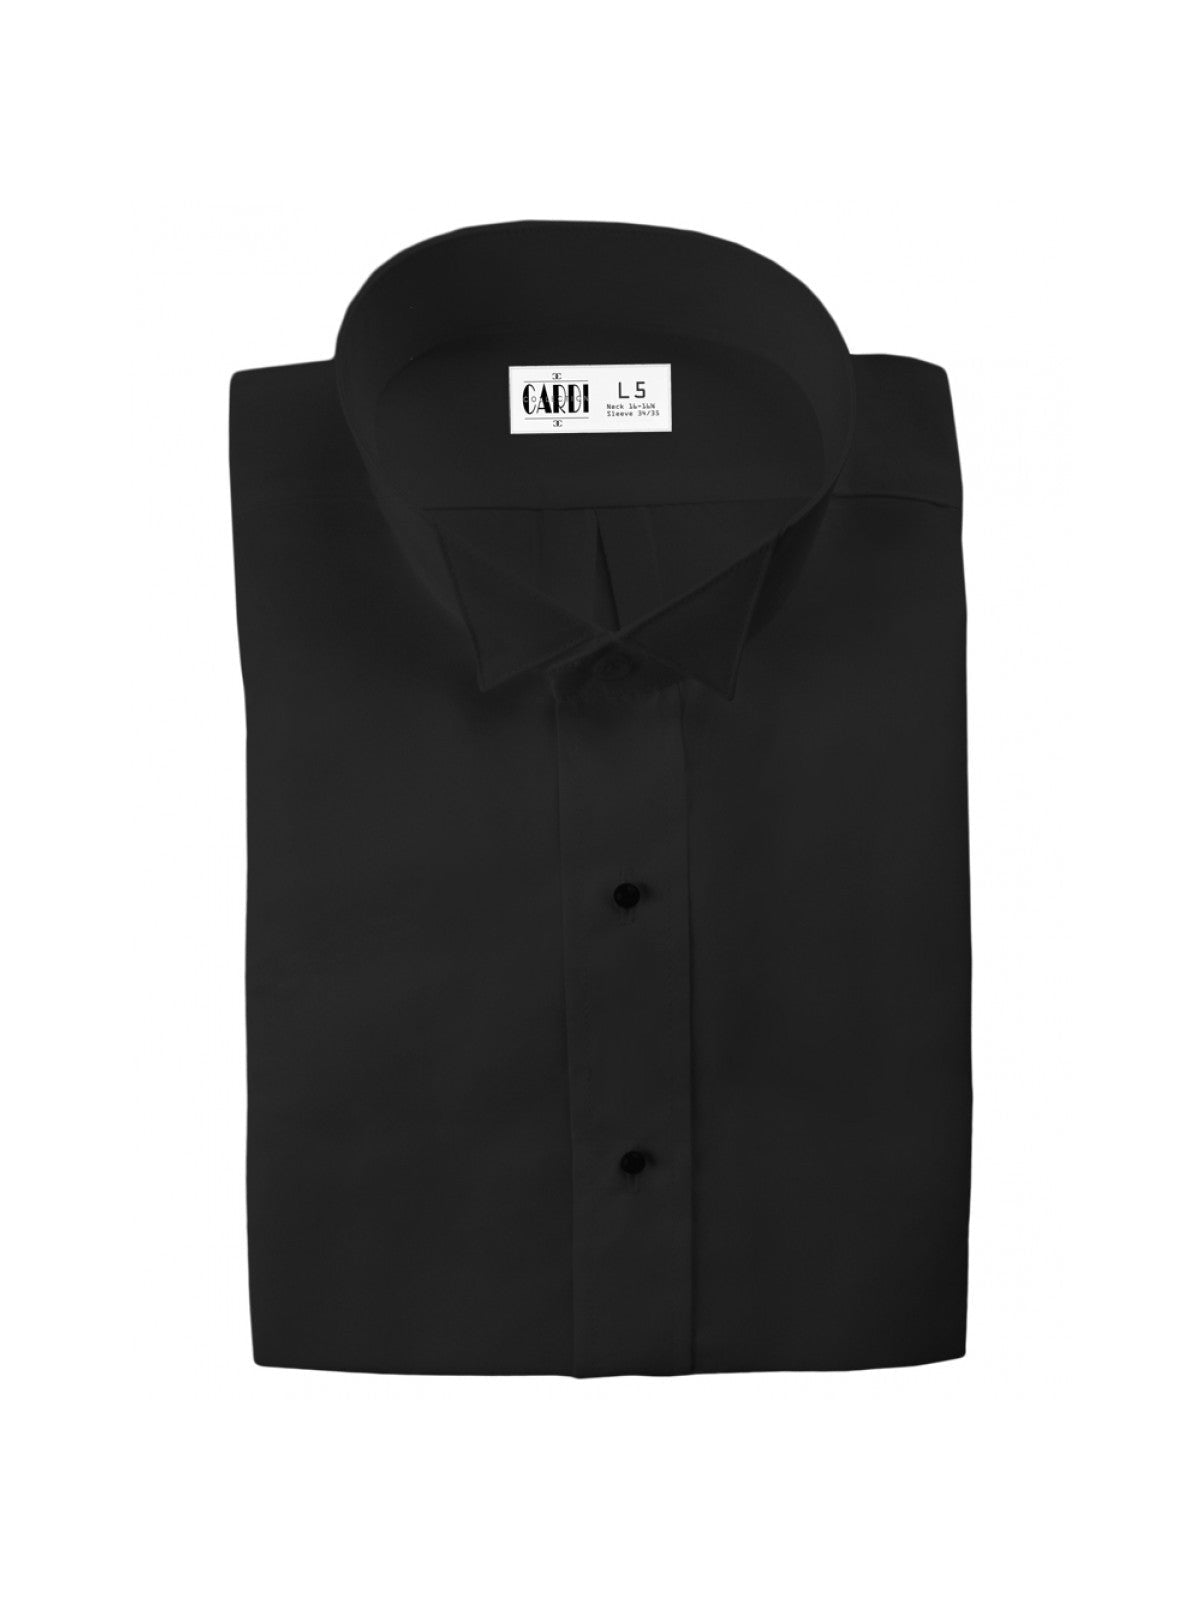 Black Wing Collar Non-Pleated (Lucca) Tuxedo Shirt by Cardi - Ultra Soft Fabric